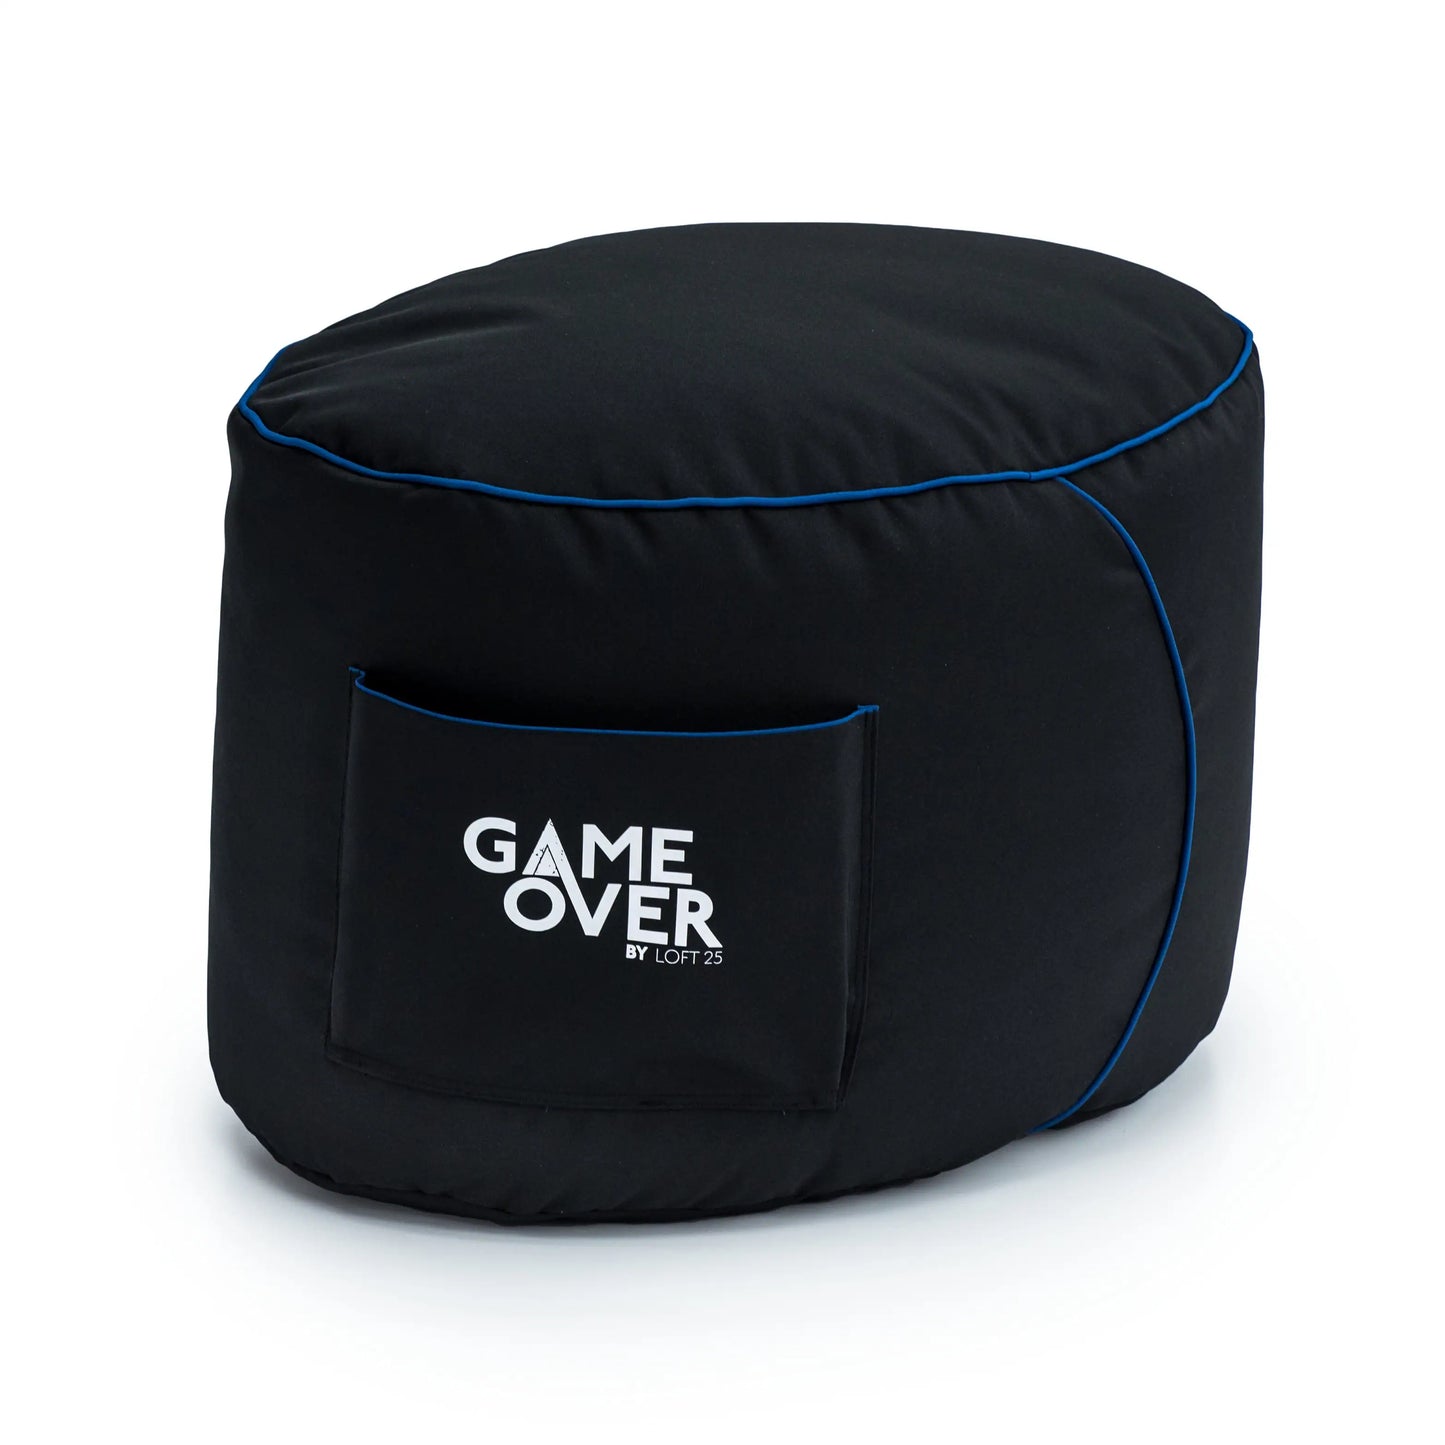 Black bean bag ottoman cover with blue trim and "GAME OVER" logo